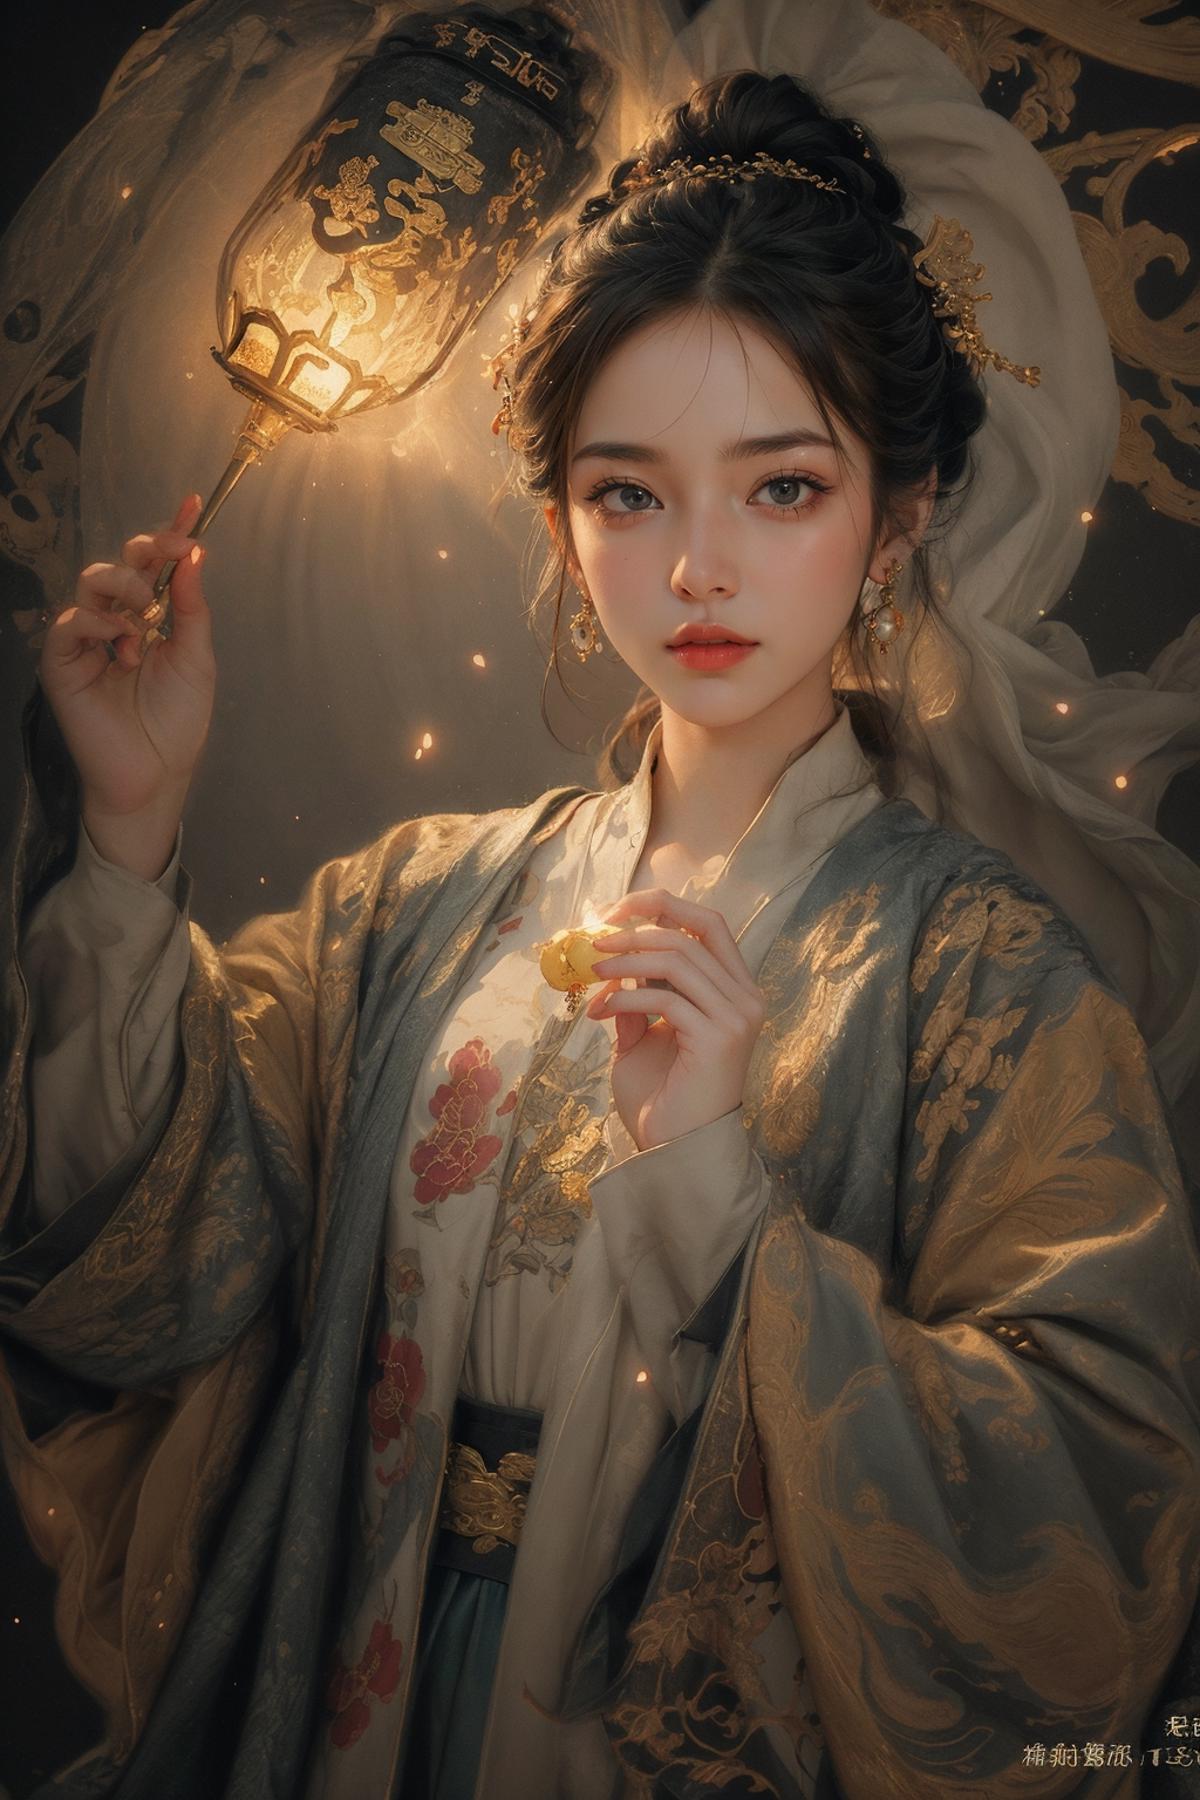 A woman in a kimono and a pearl necklace holding a lantern.